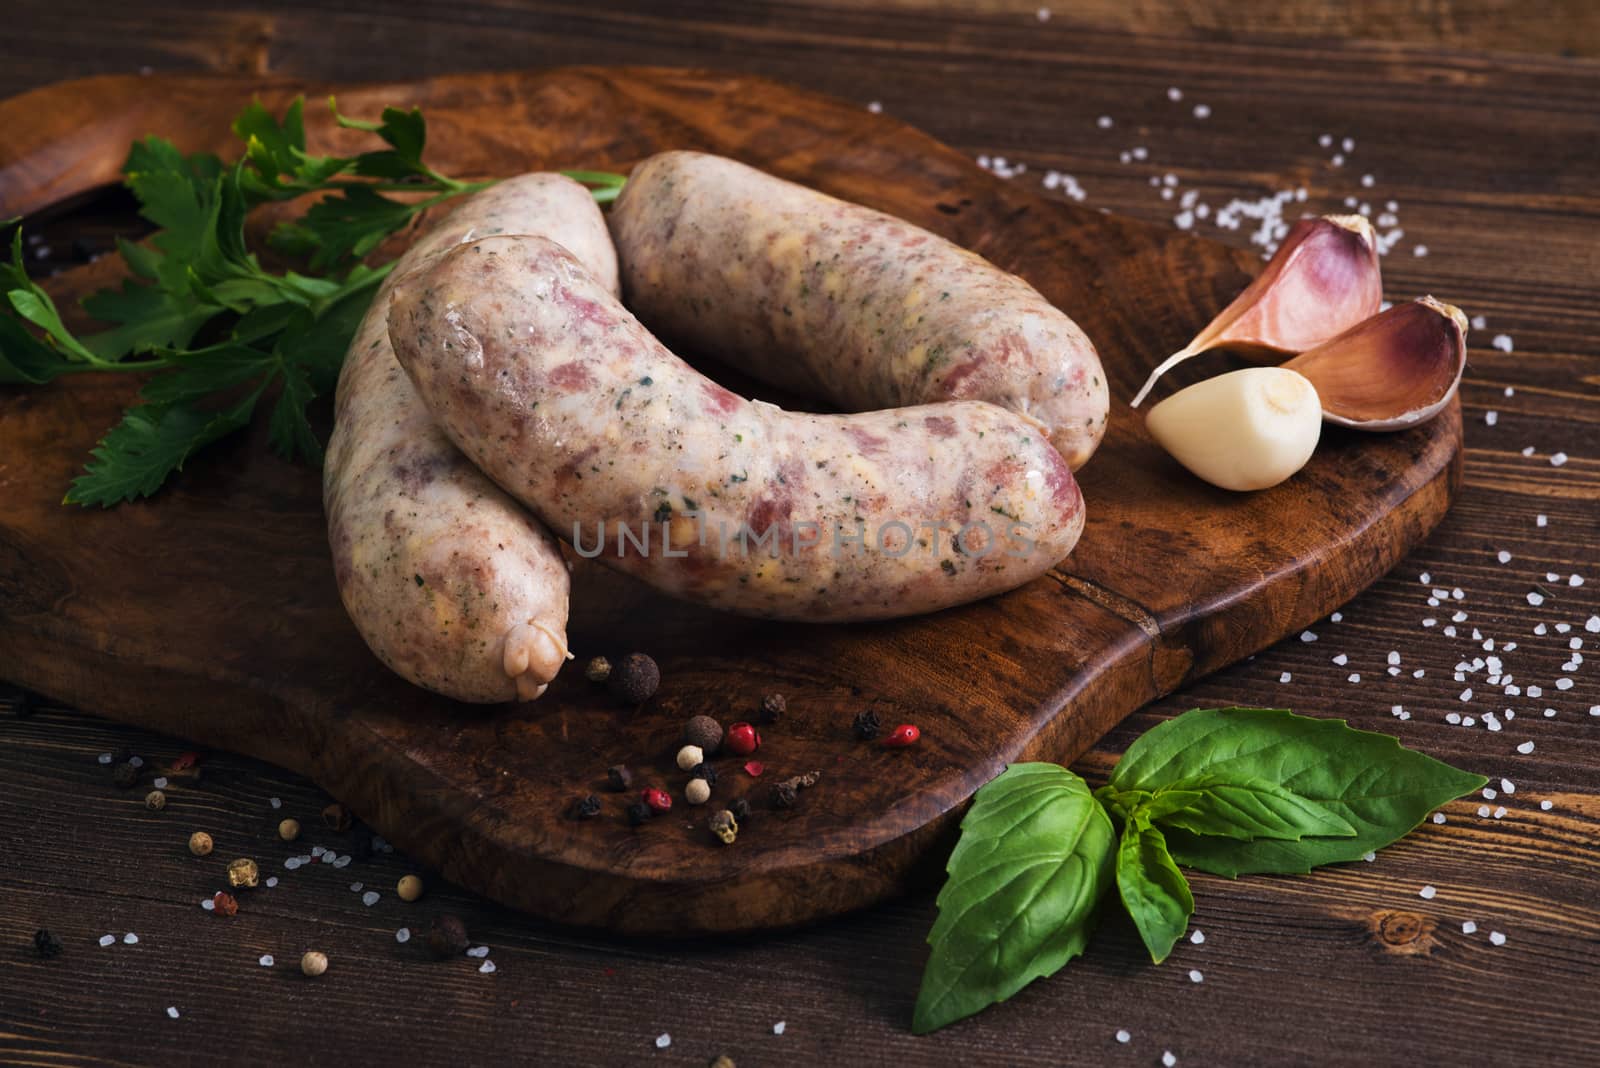 Raw sausages with garlic and parsley on the cutting board